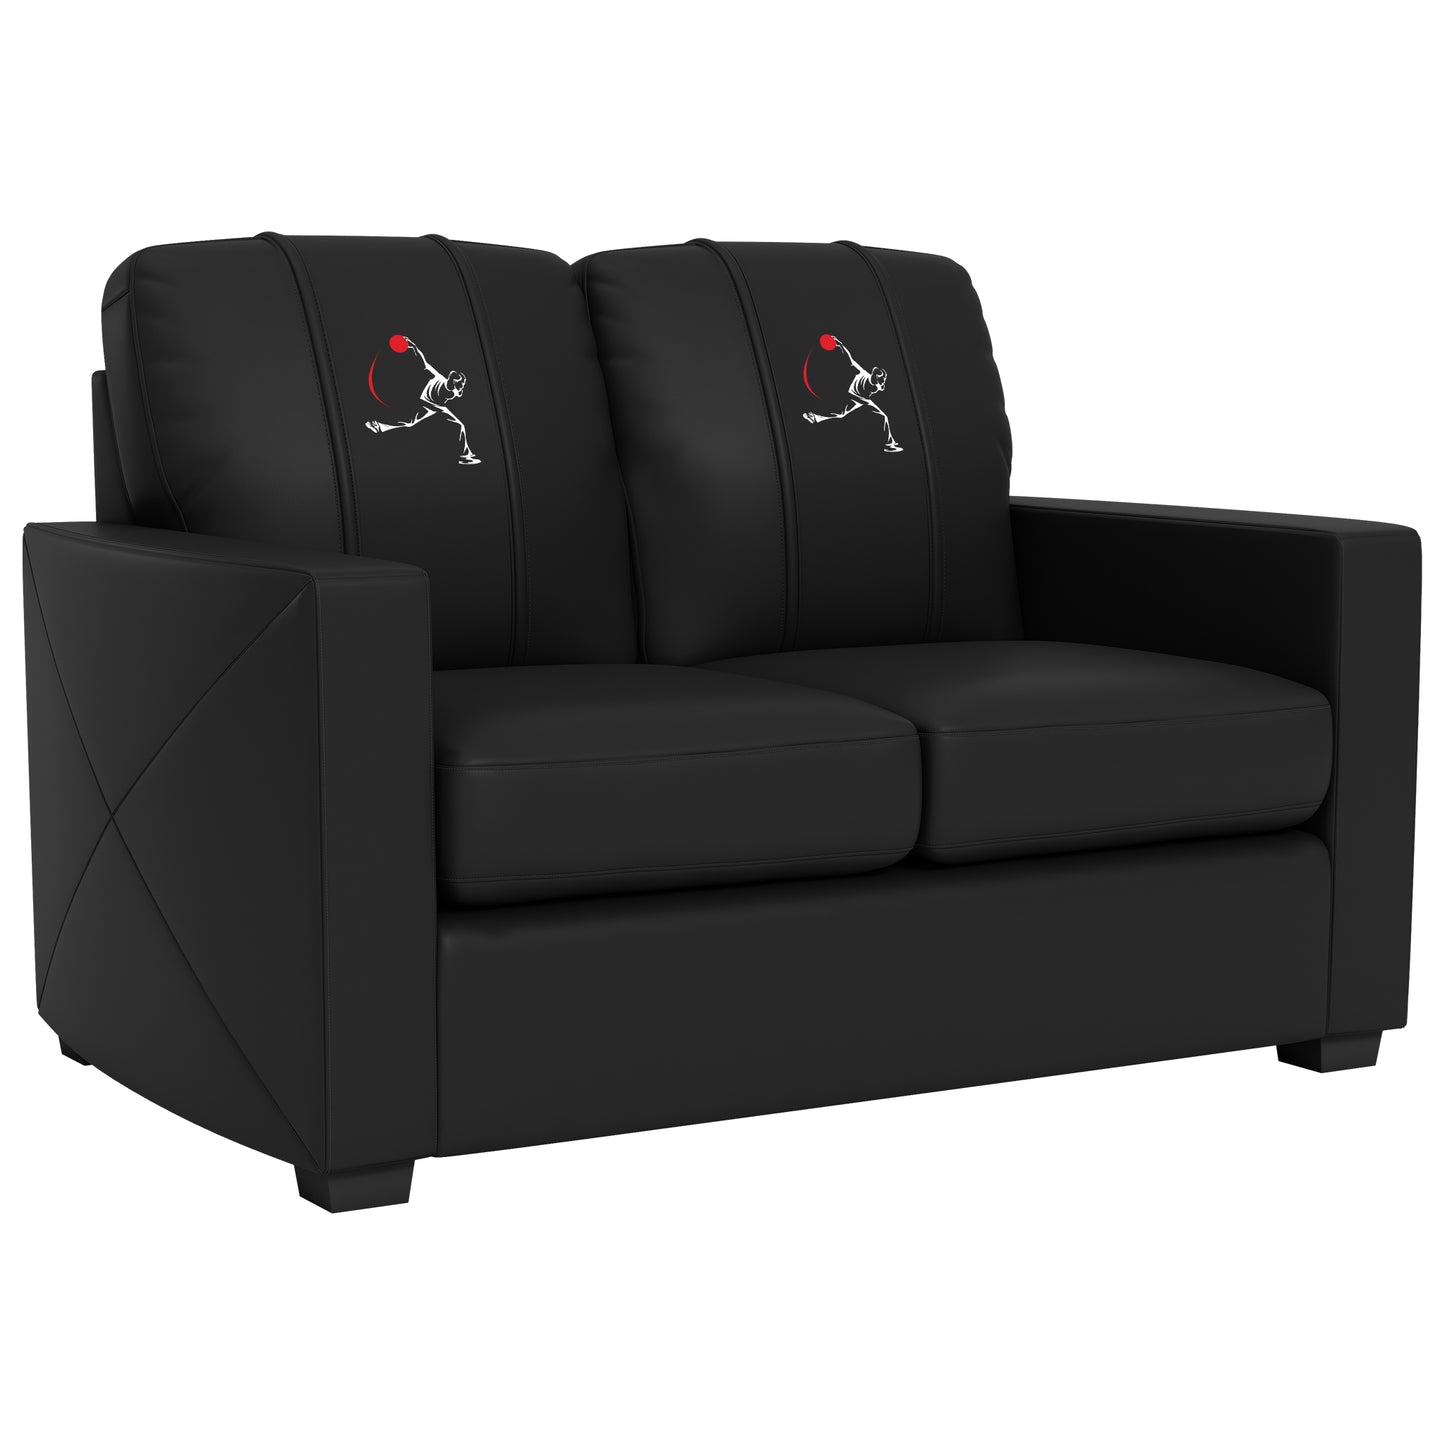 Silver Loveseat with Bowler Logo Panel